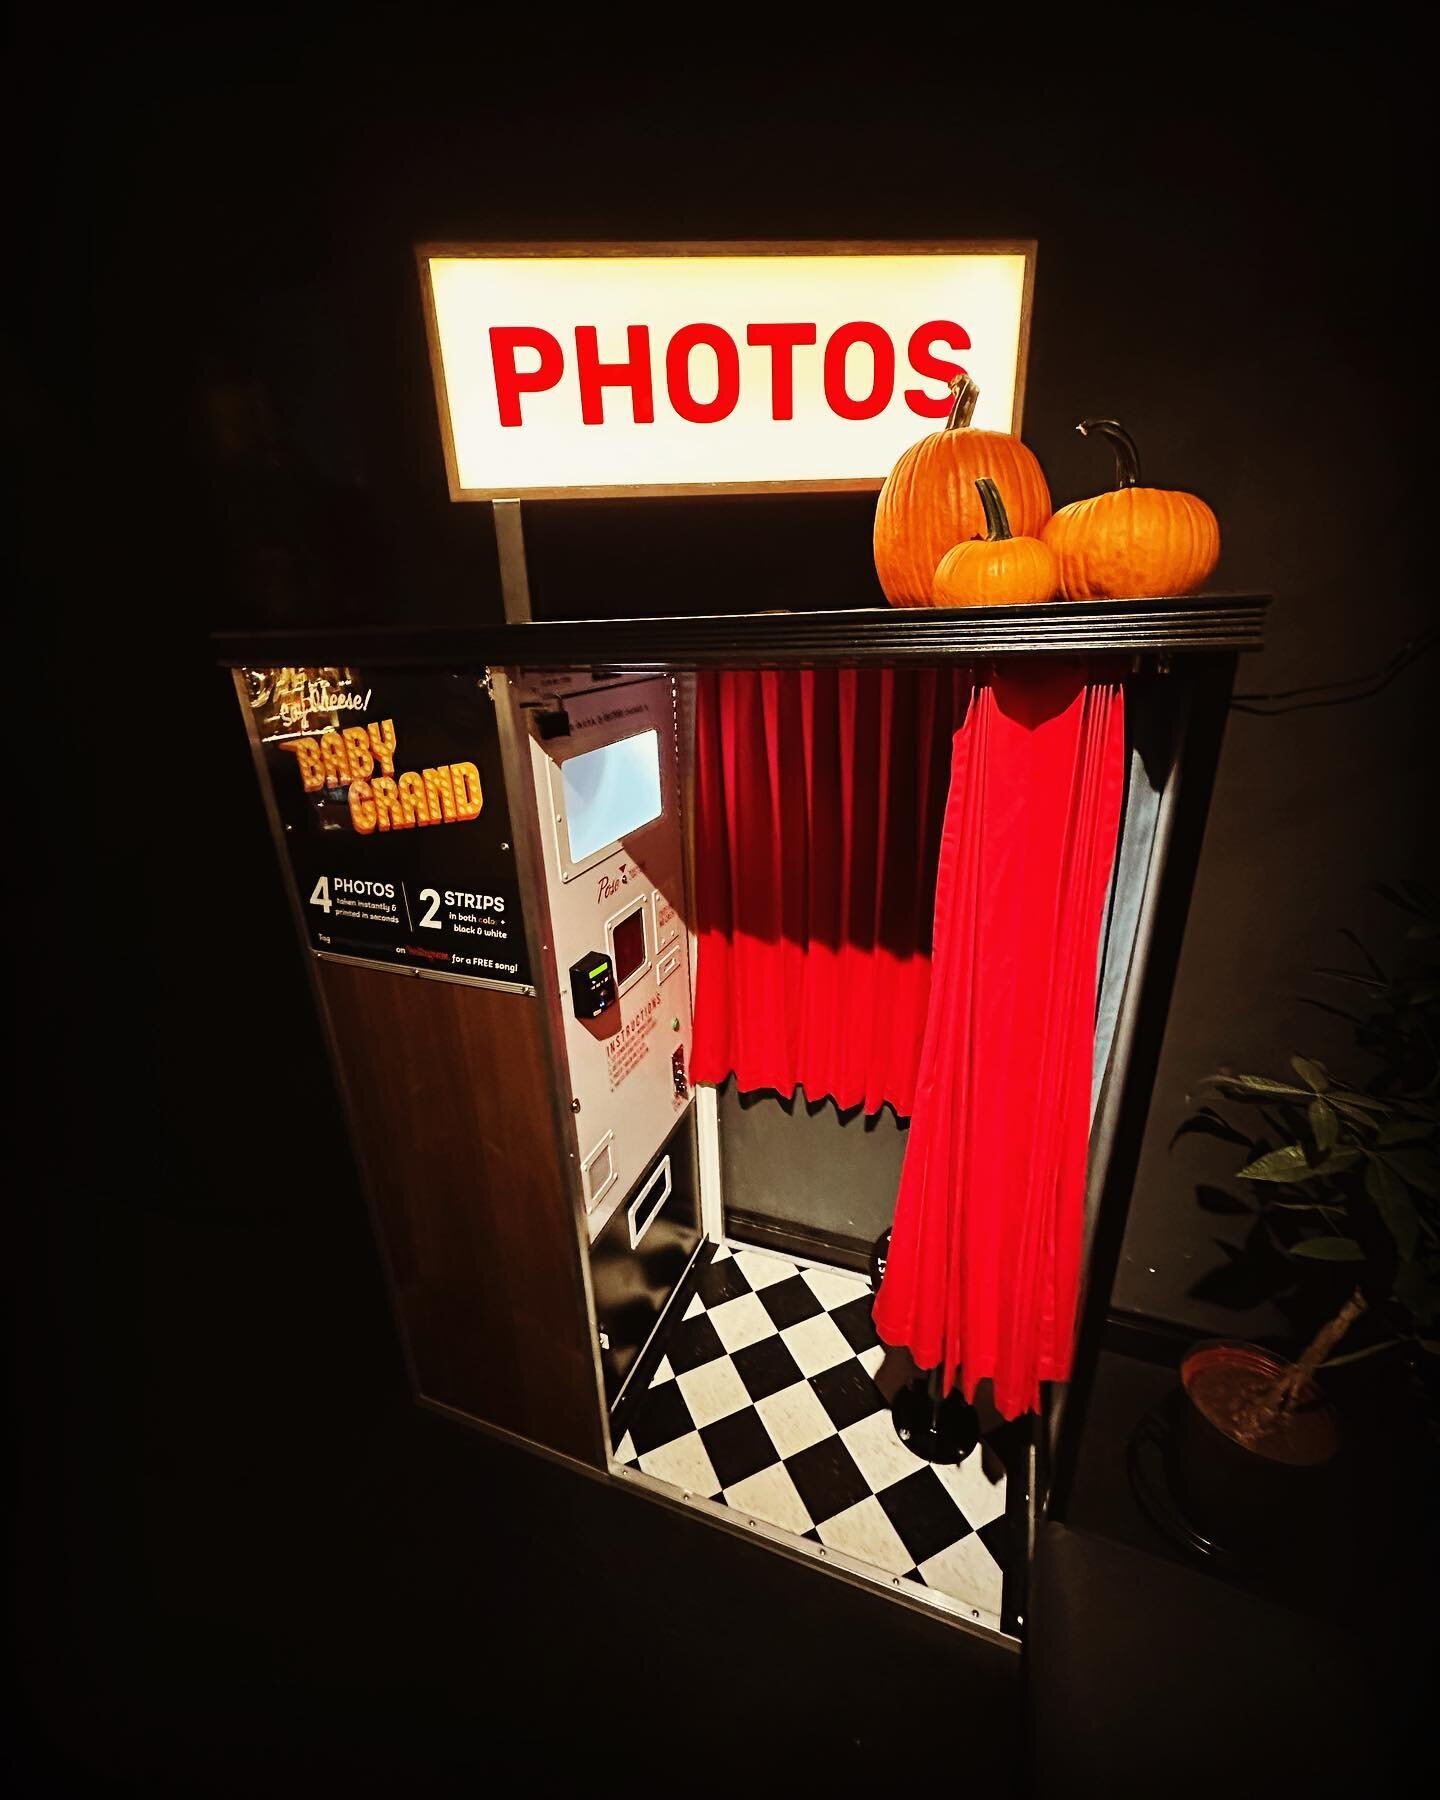 This little beauty is so excited for her first Halloween! #photobooth #halloween #karaoke #nyc